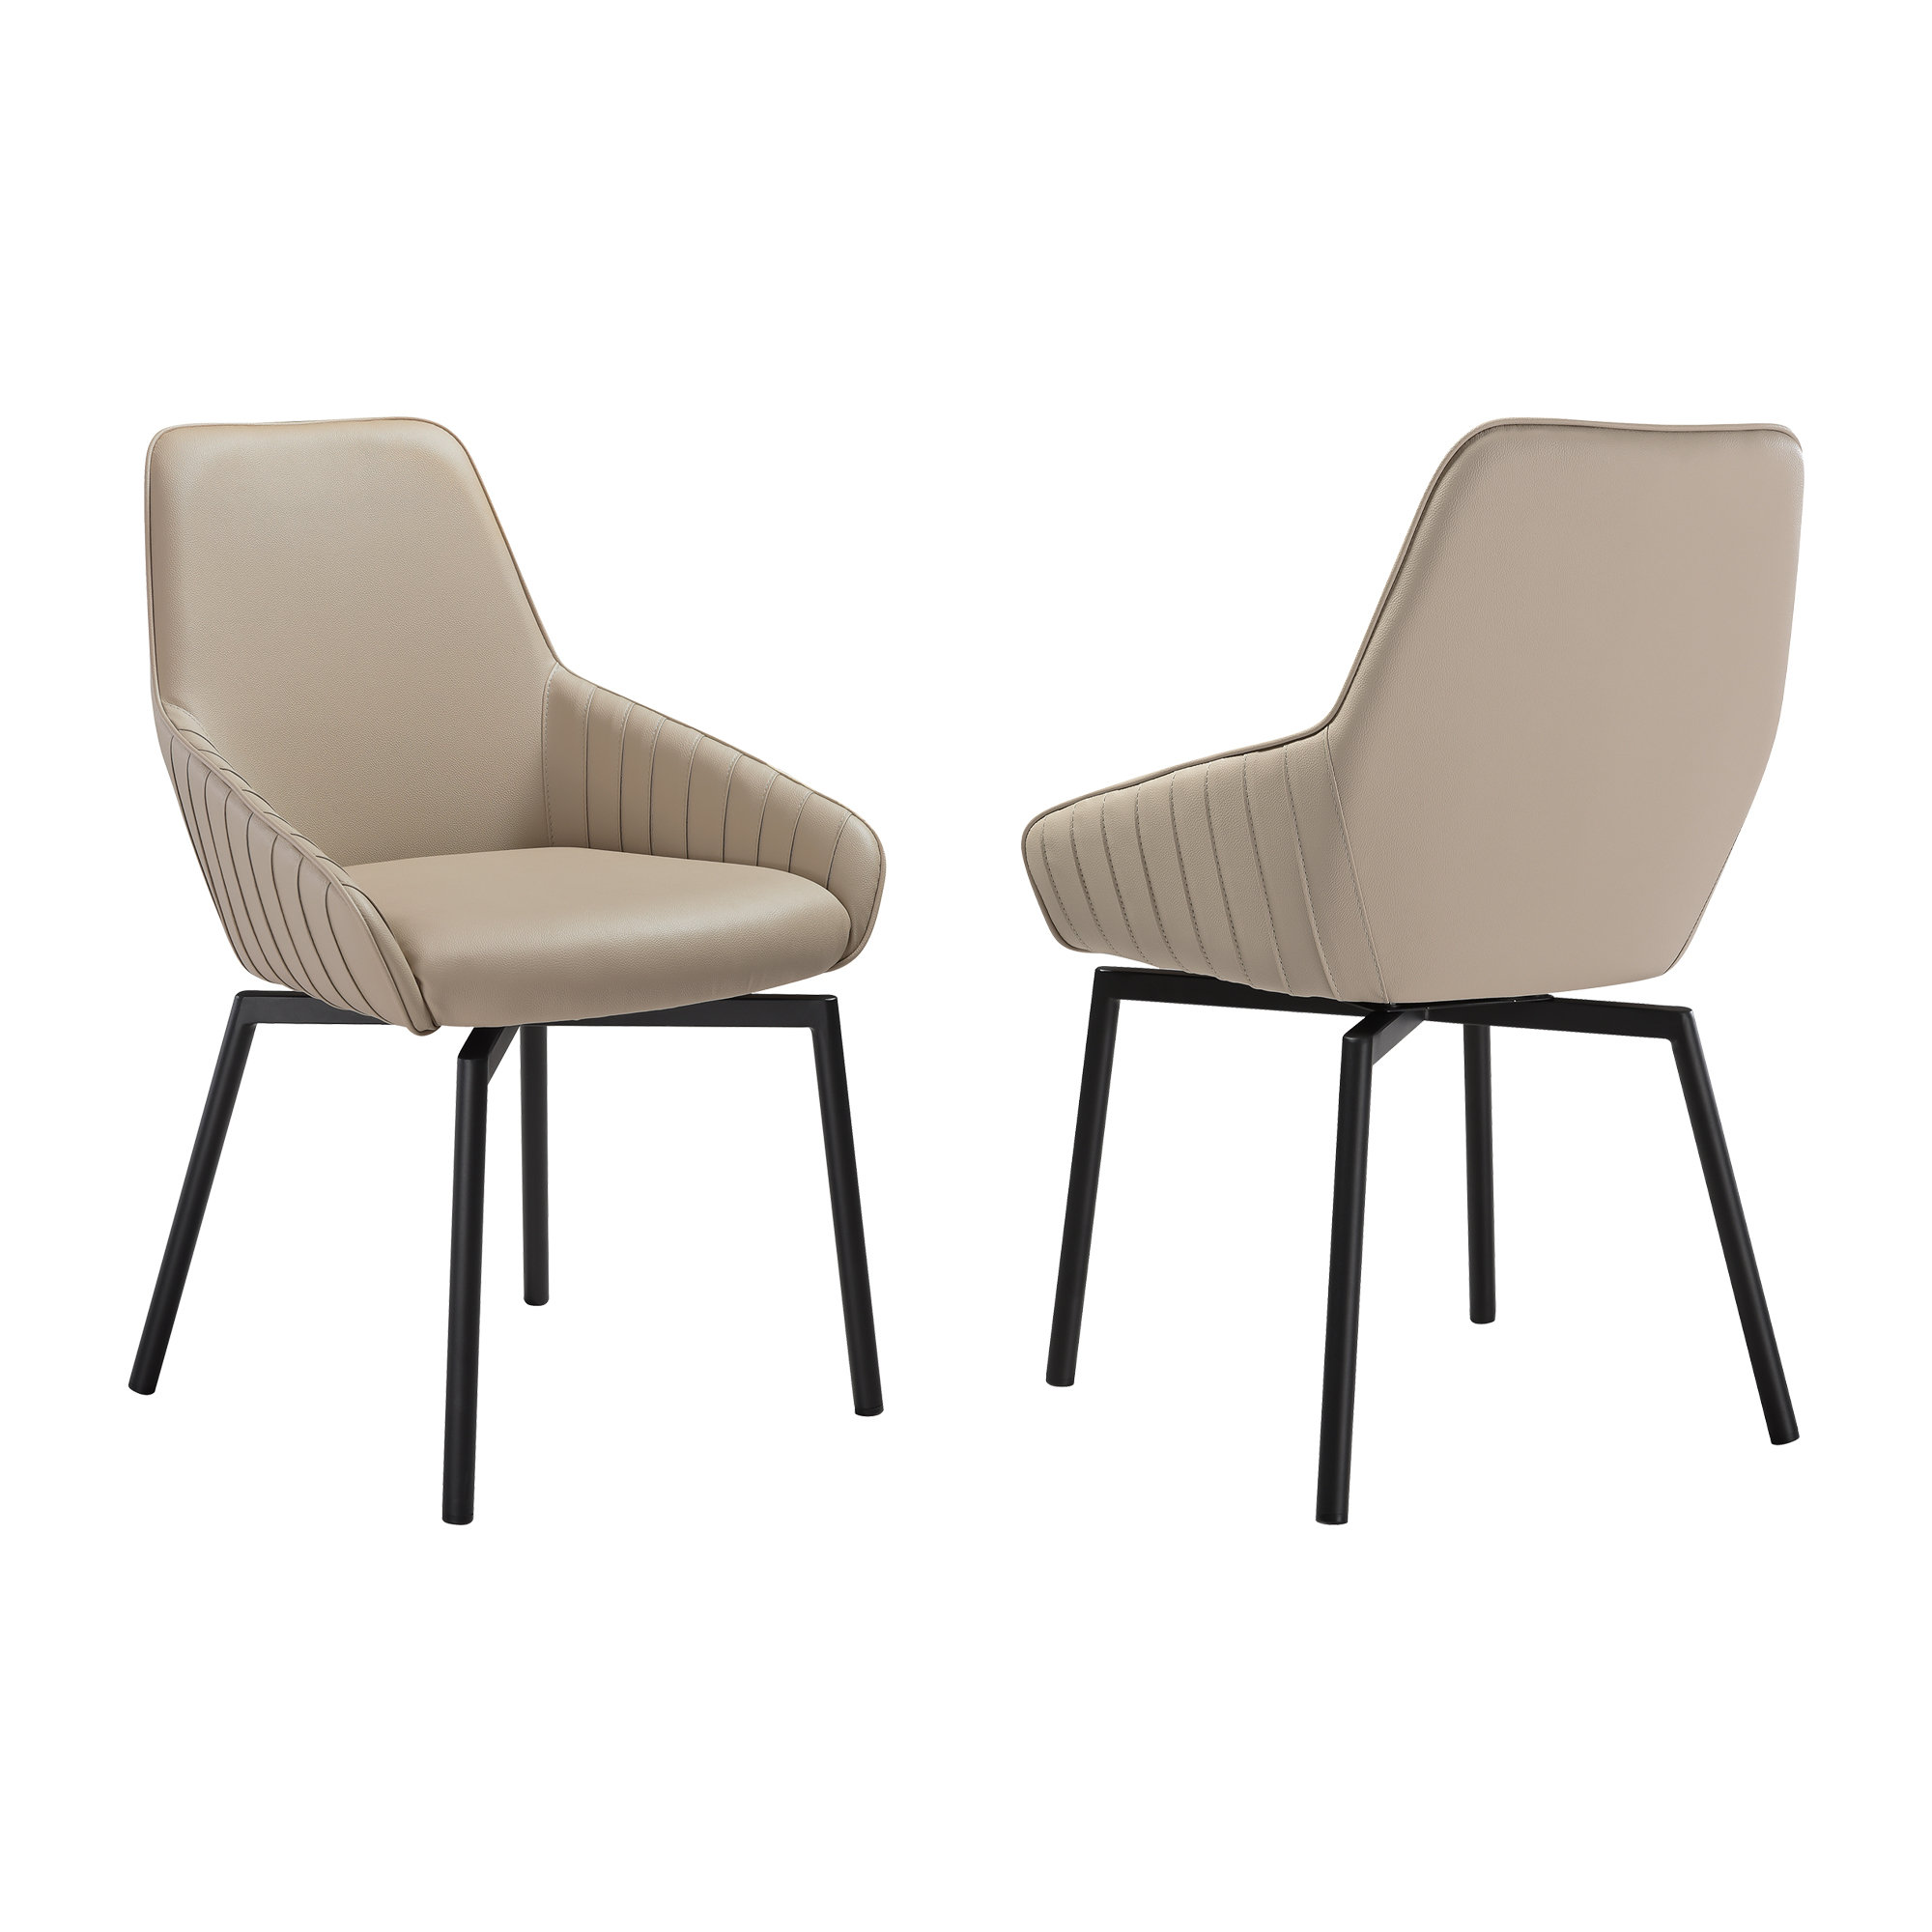 George Oliver Jimm Swivel Modern Dining Chairs in Faux Leather ...